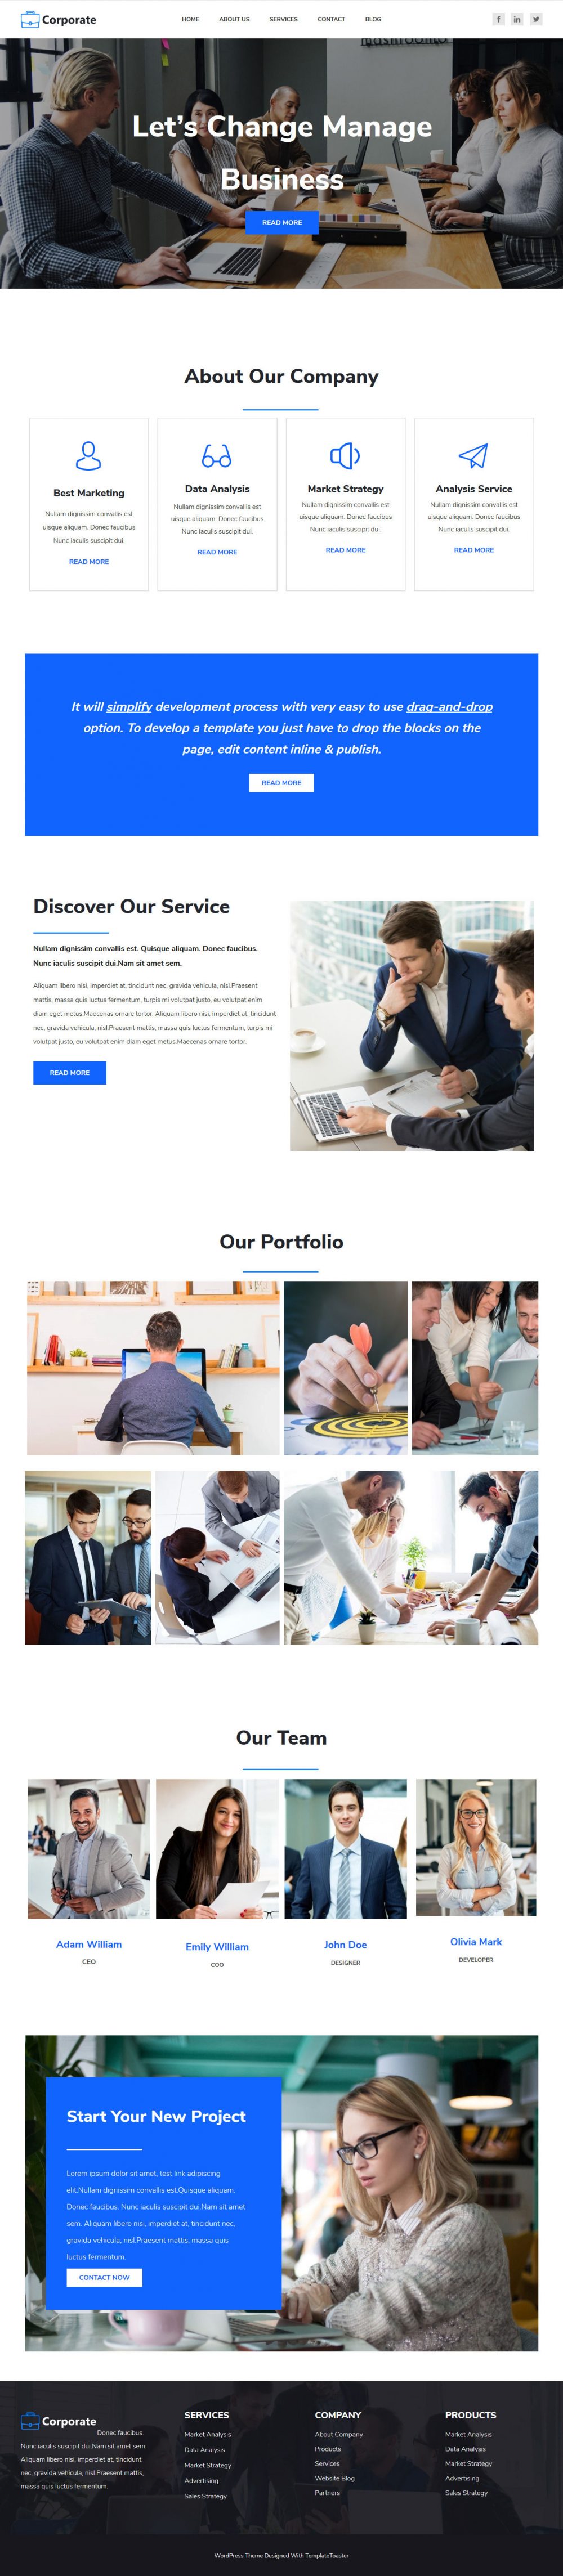 Corporate Business and Finance Drupal Theme